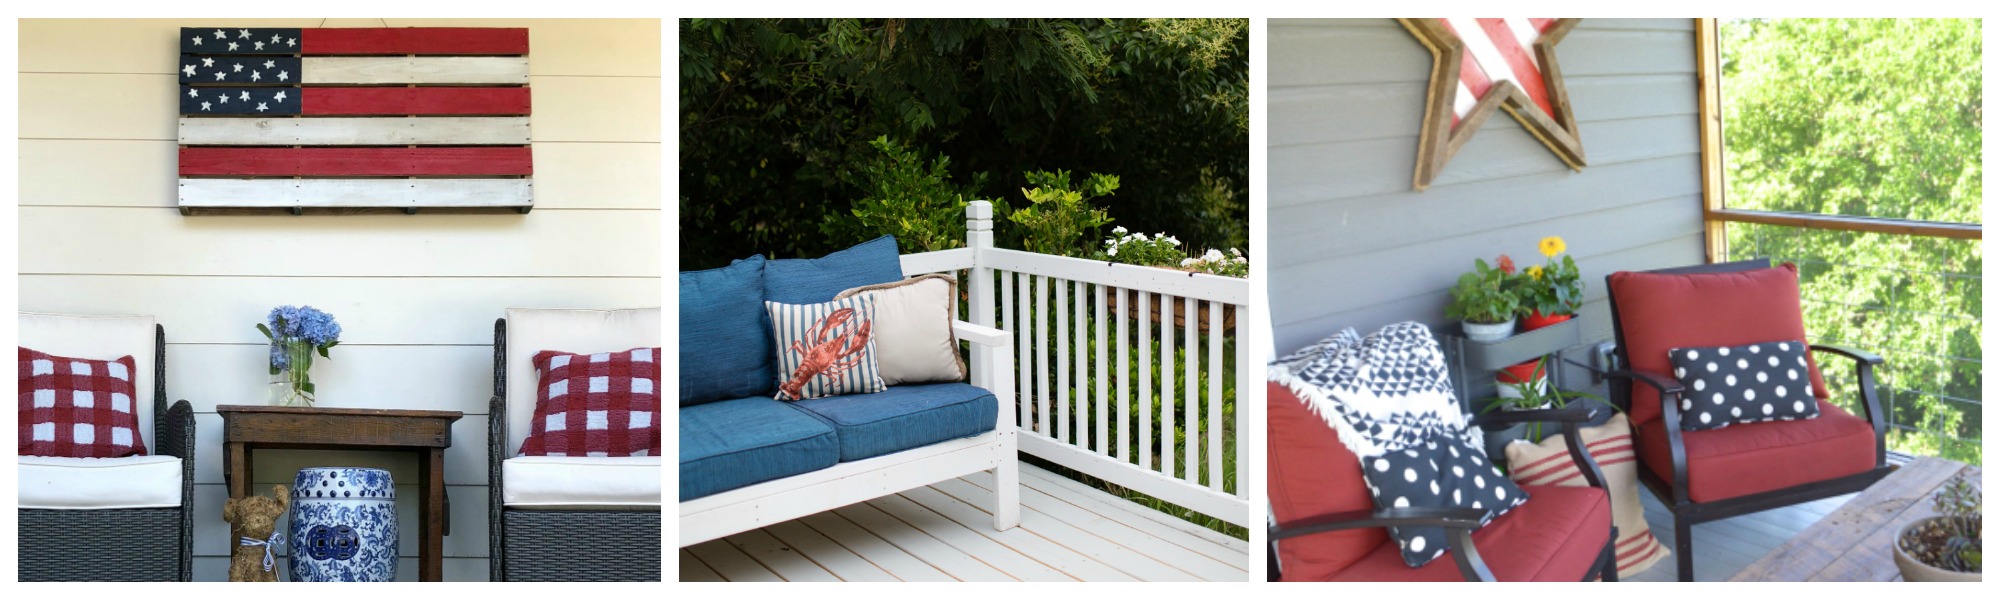 Red, white and blue bloggers home details.